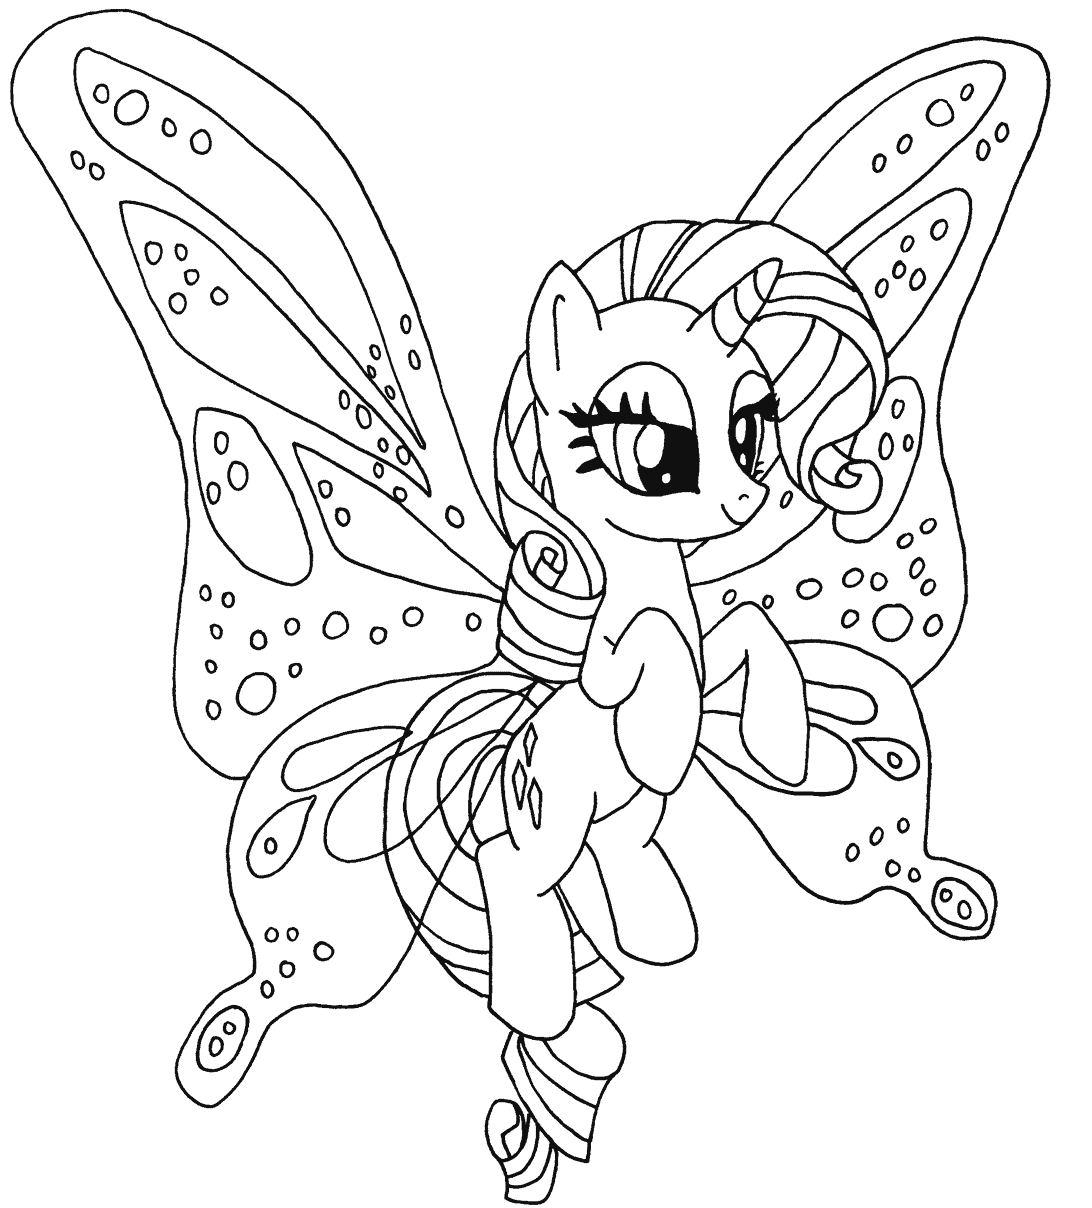 Little Pony Flying Coloring Page - Free Printable Coloring Pages for Kids